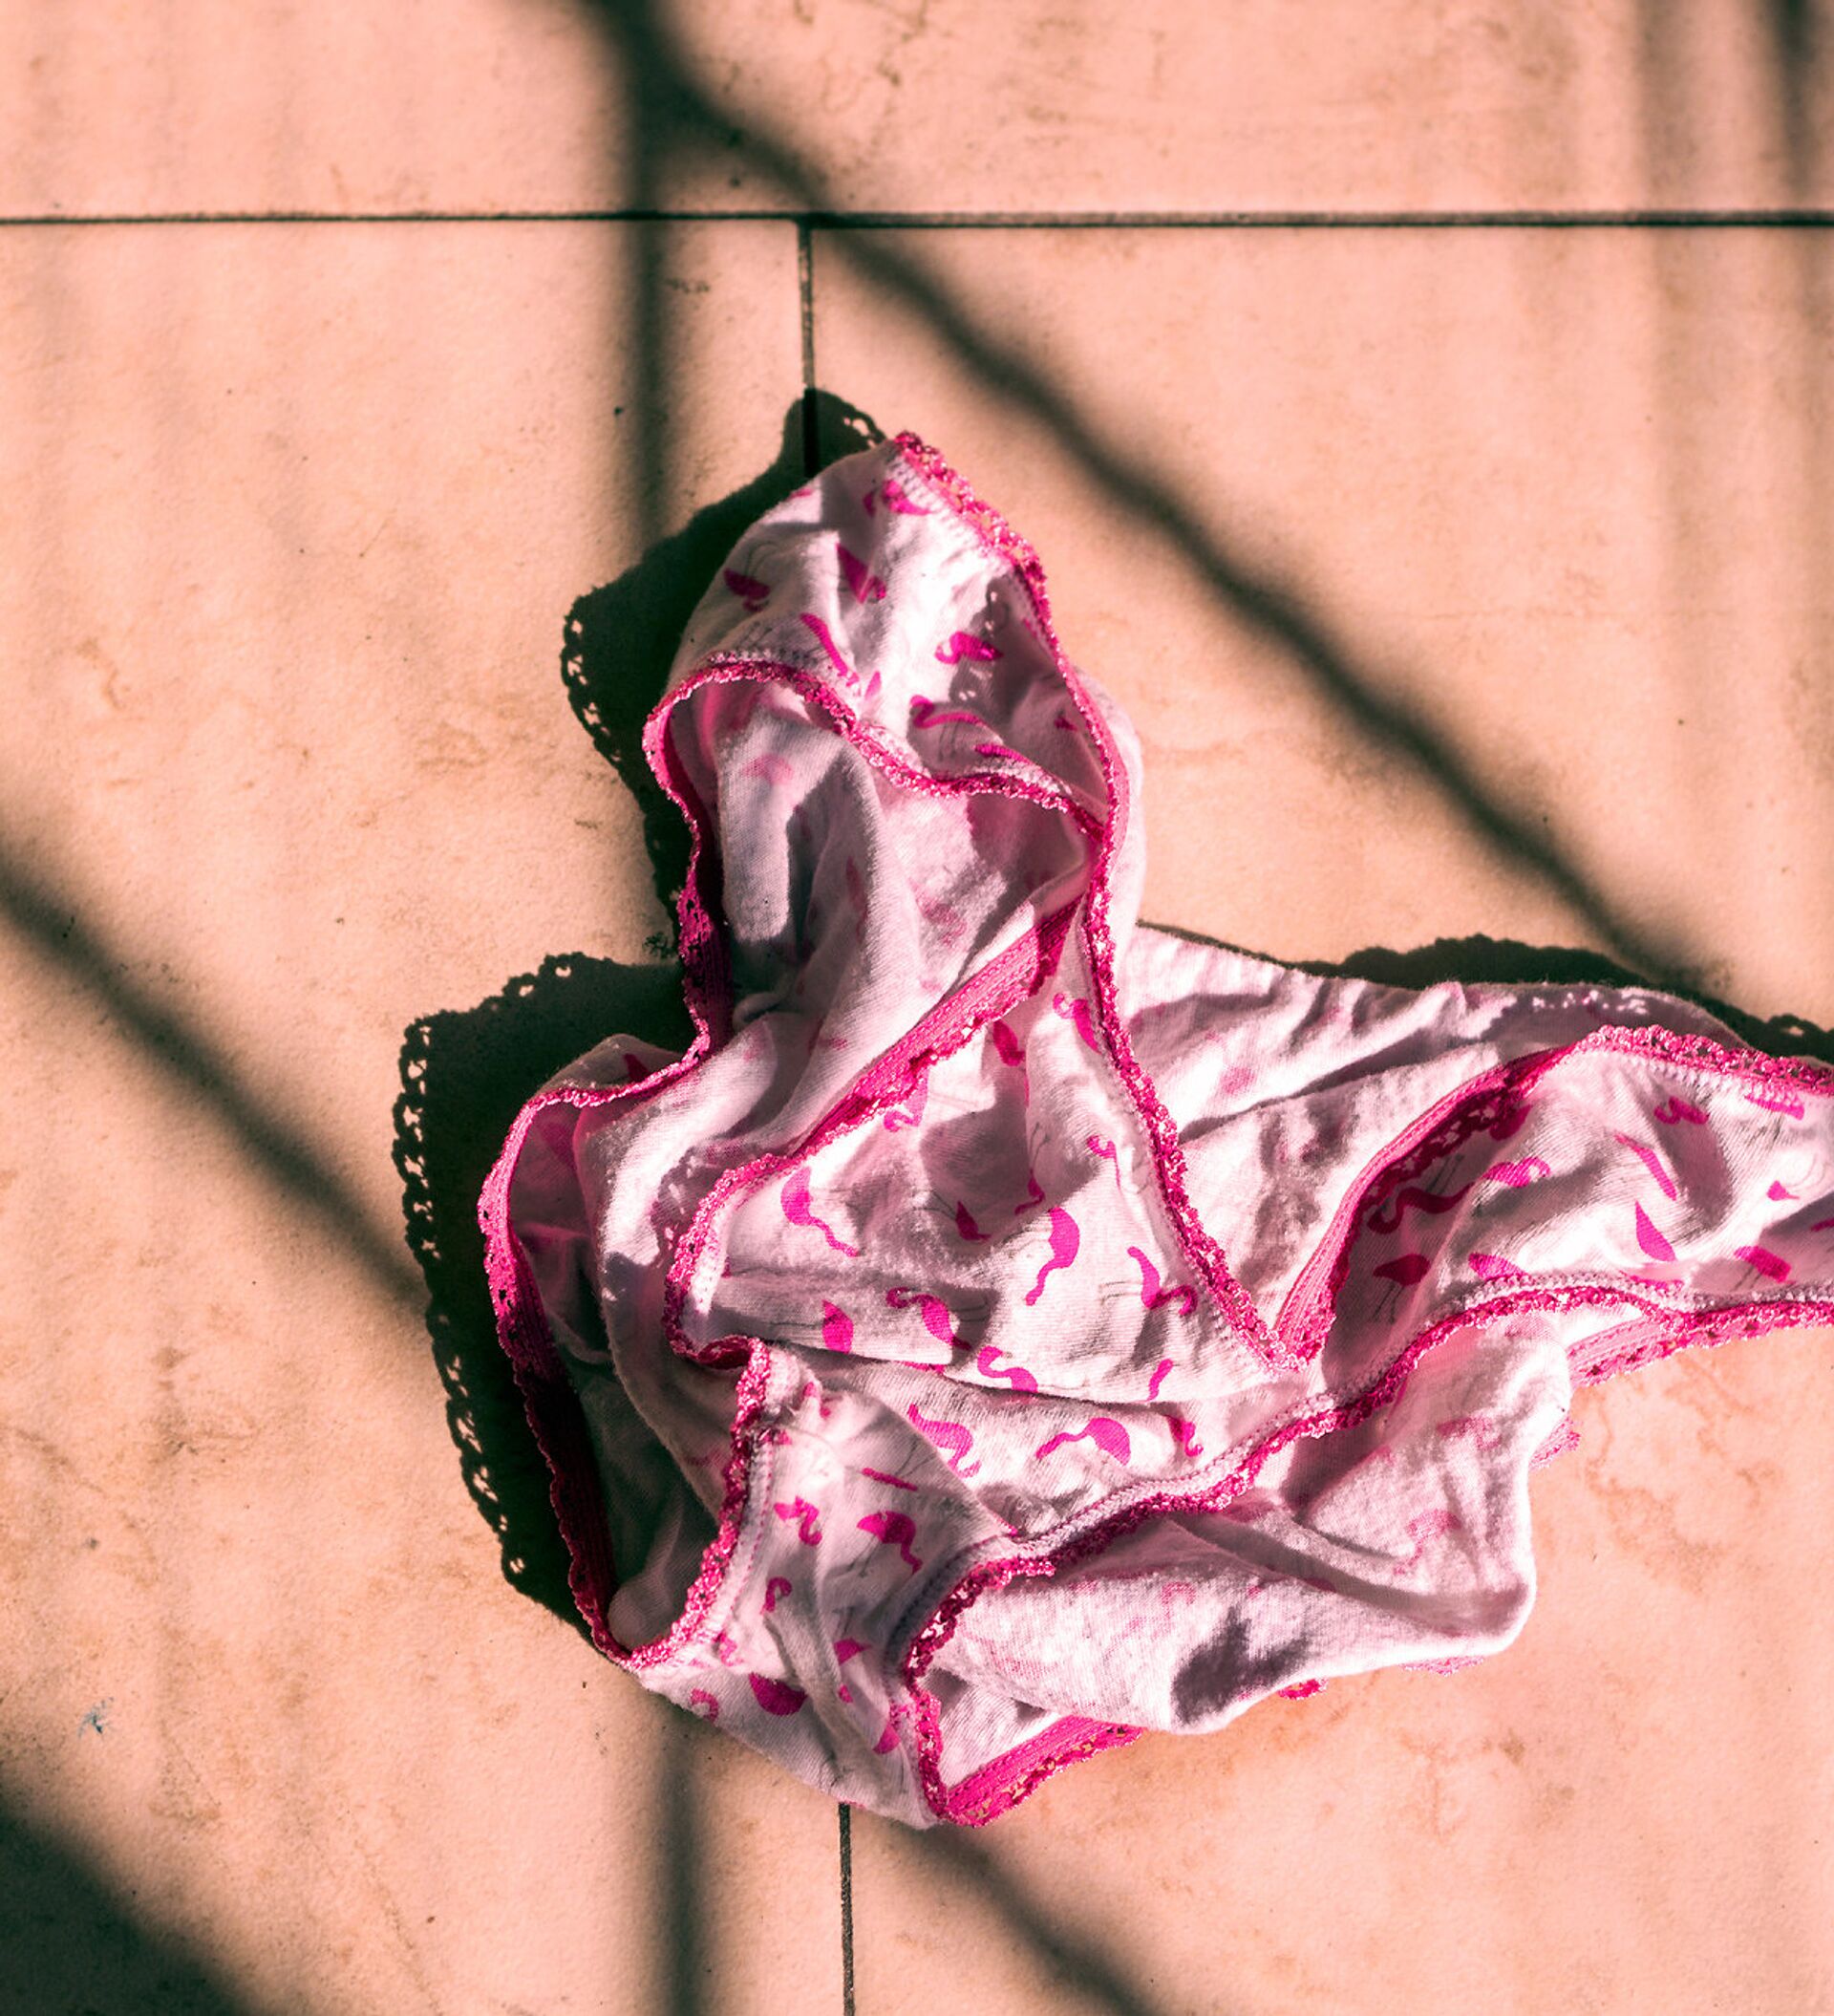 Airing Dirty Laundry: Worn Panties Become Hot Commodity in Denmark